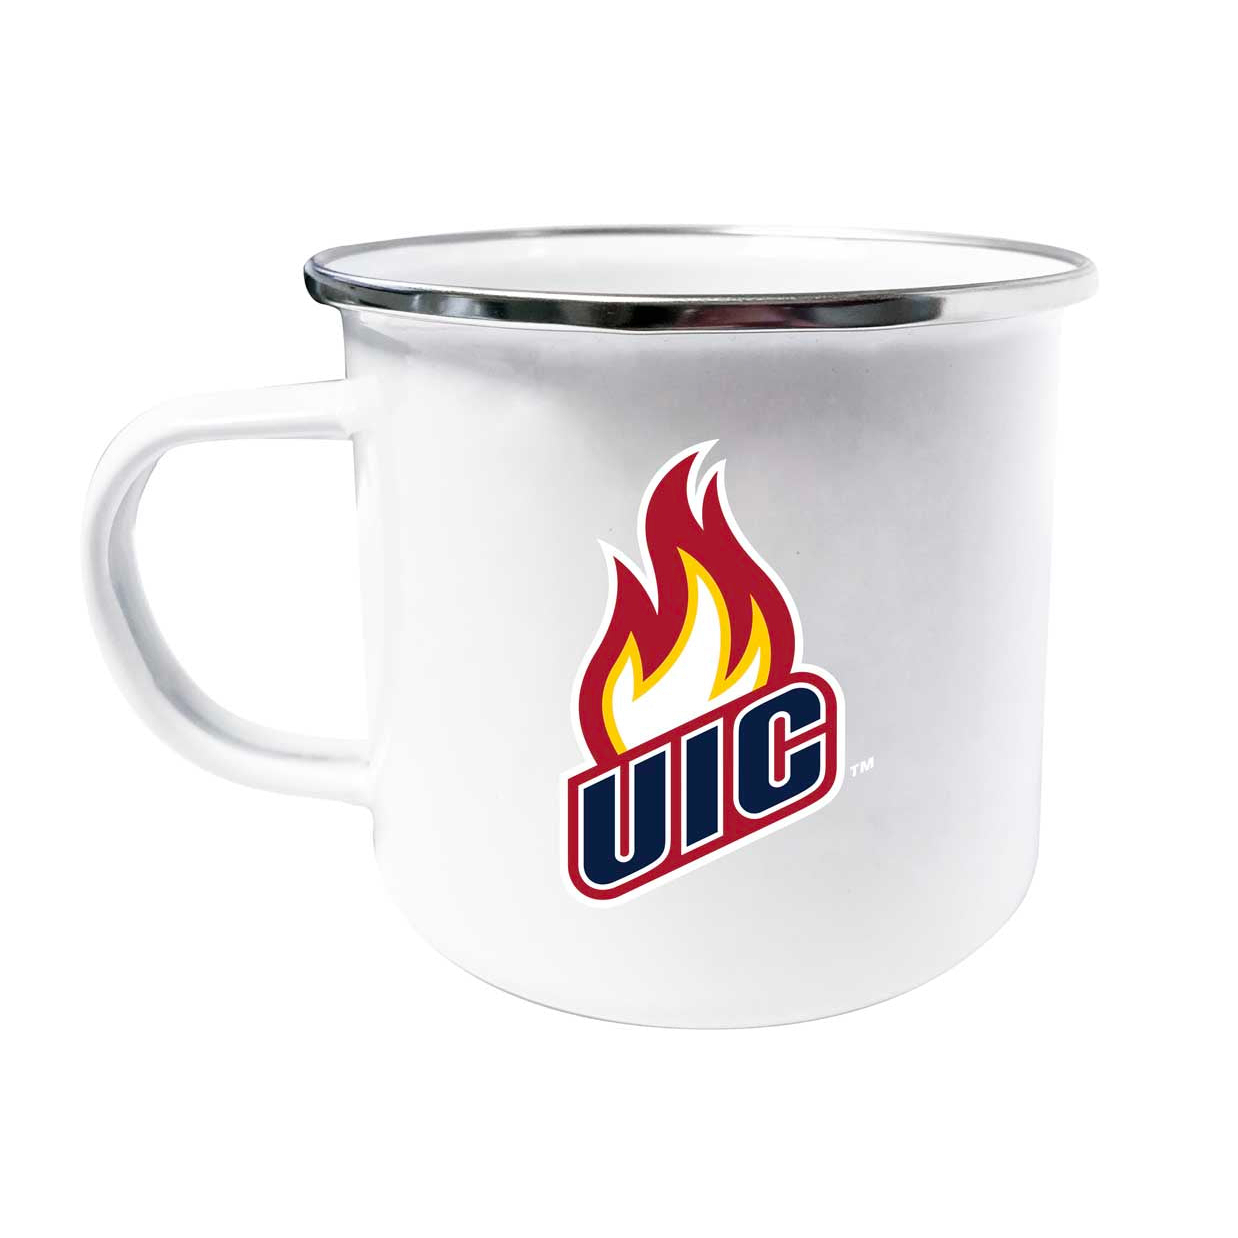 University Of Illinois At Chicago Tin Camper Coffee Mug - Choose Your Color - Gray